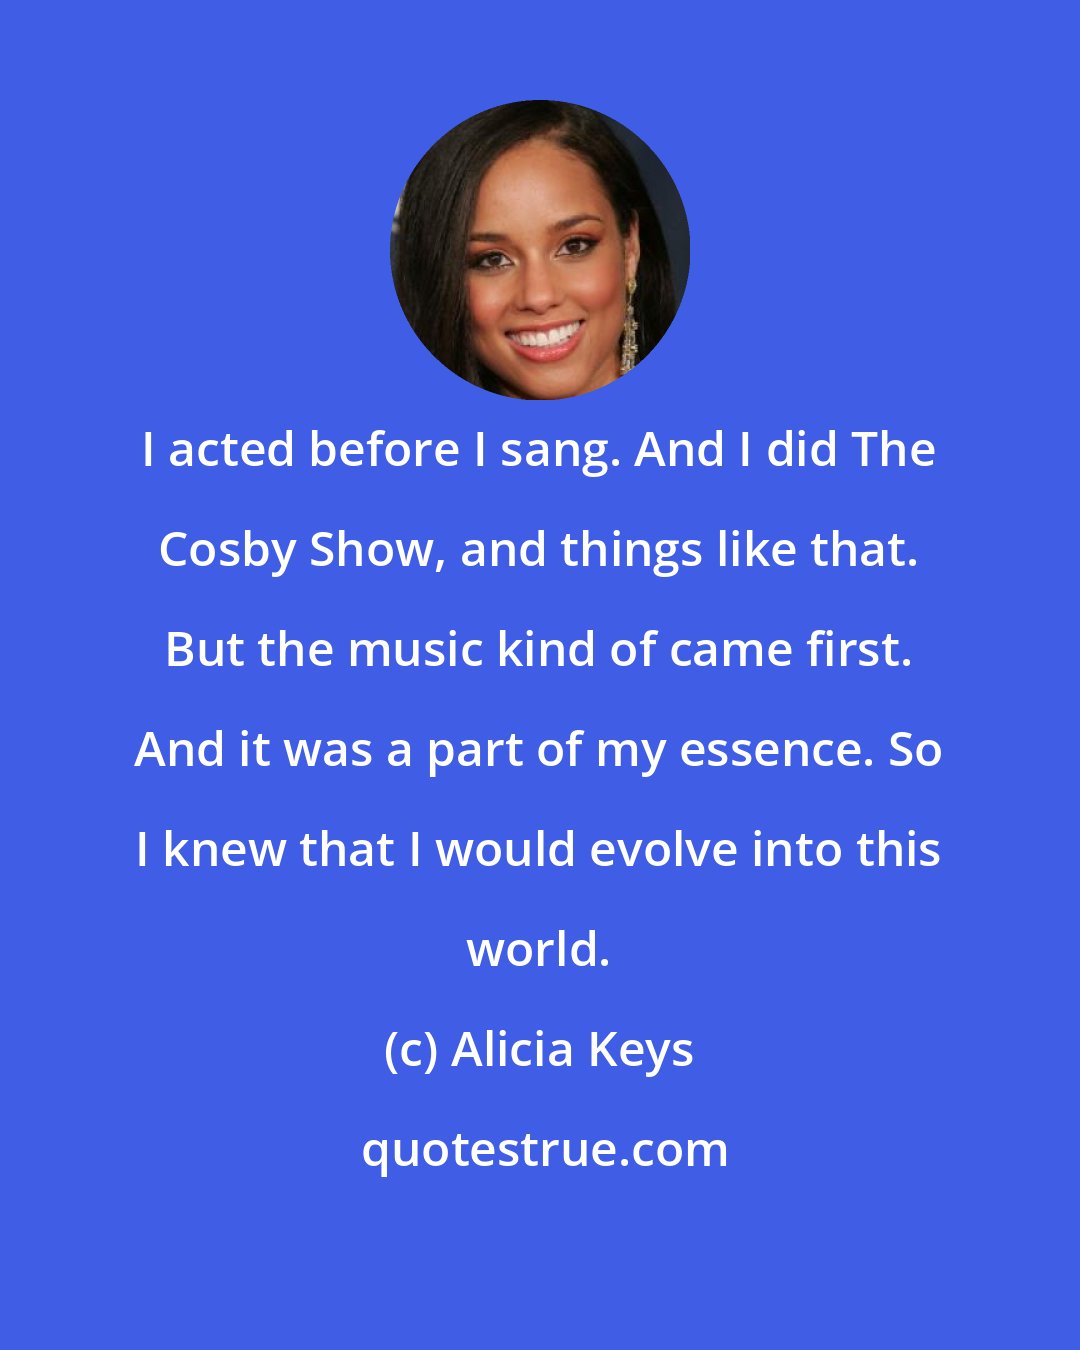 Alicia Keys: I acted before I sang. And I did The Cosby Show, and things like that. But the music kind of came first. And it was a part of my essence. So I knew that I would evolve into this world.